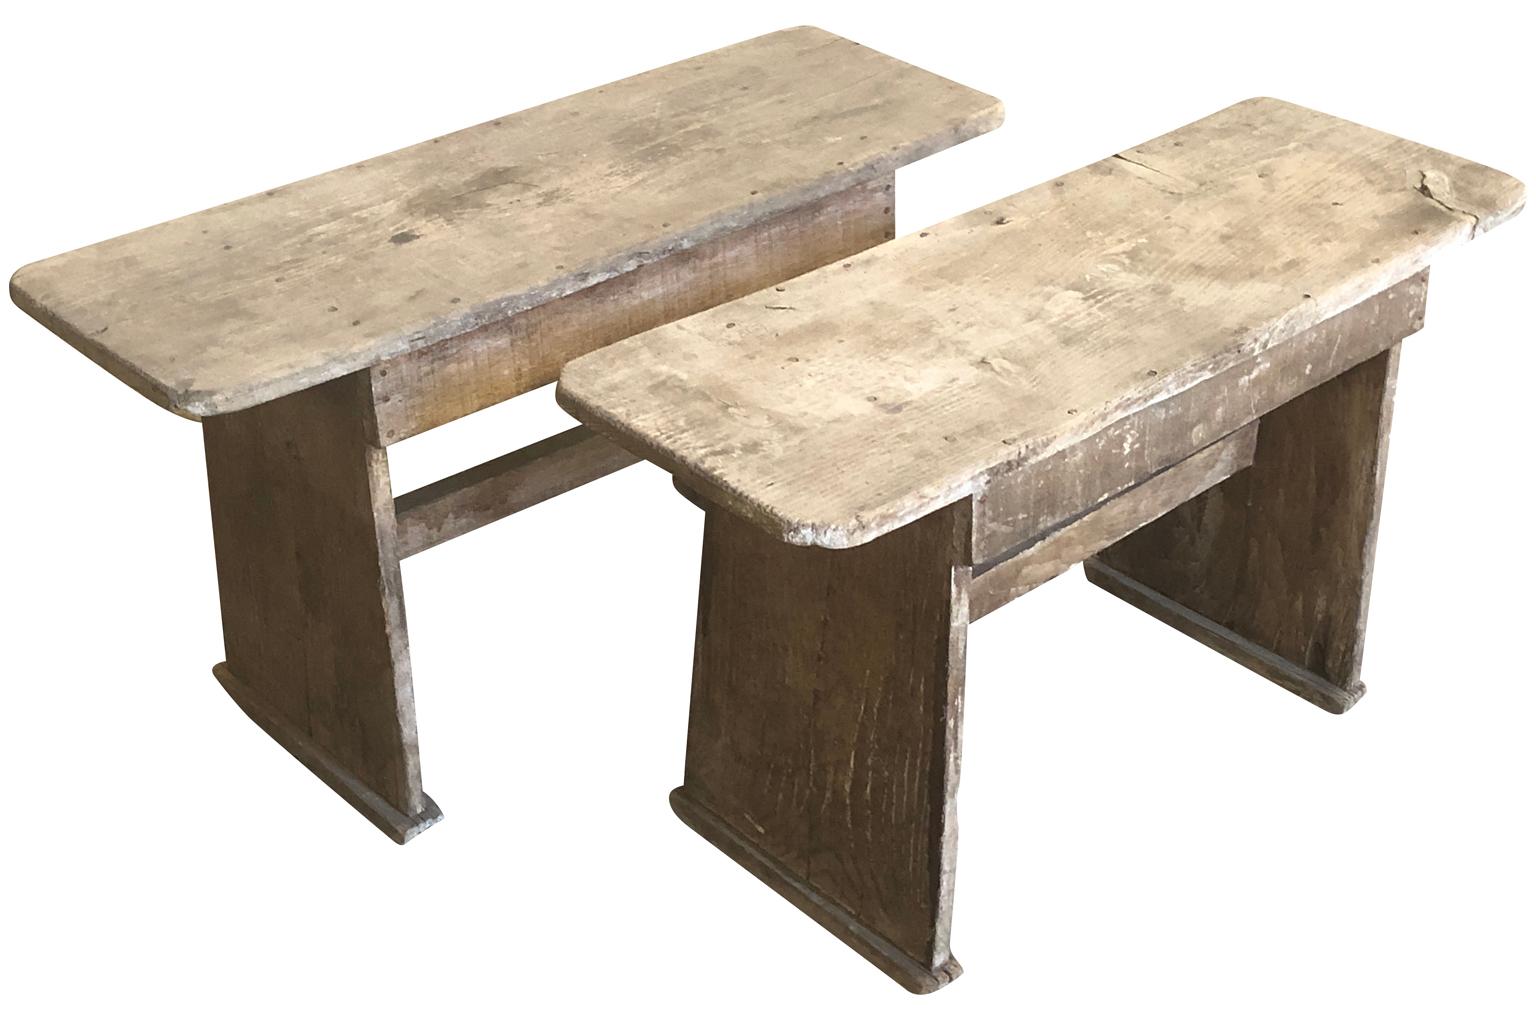 A very charming pair of small Primitive benches - small end tables from the Provence region of France constructed from naturally washed pine wood. Charming accent pieces for a casual interior.